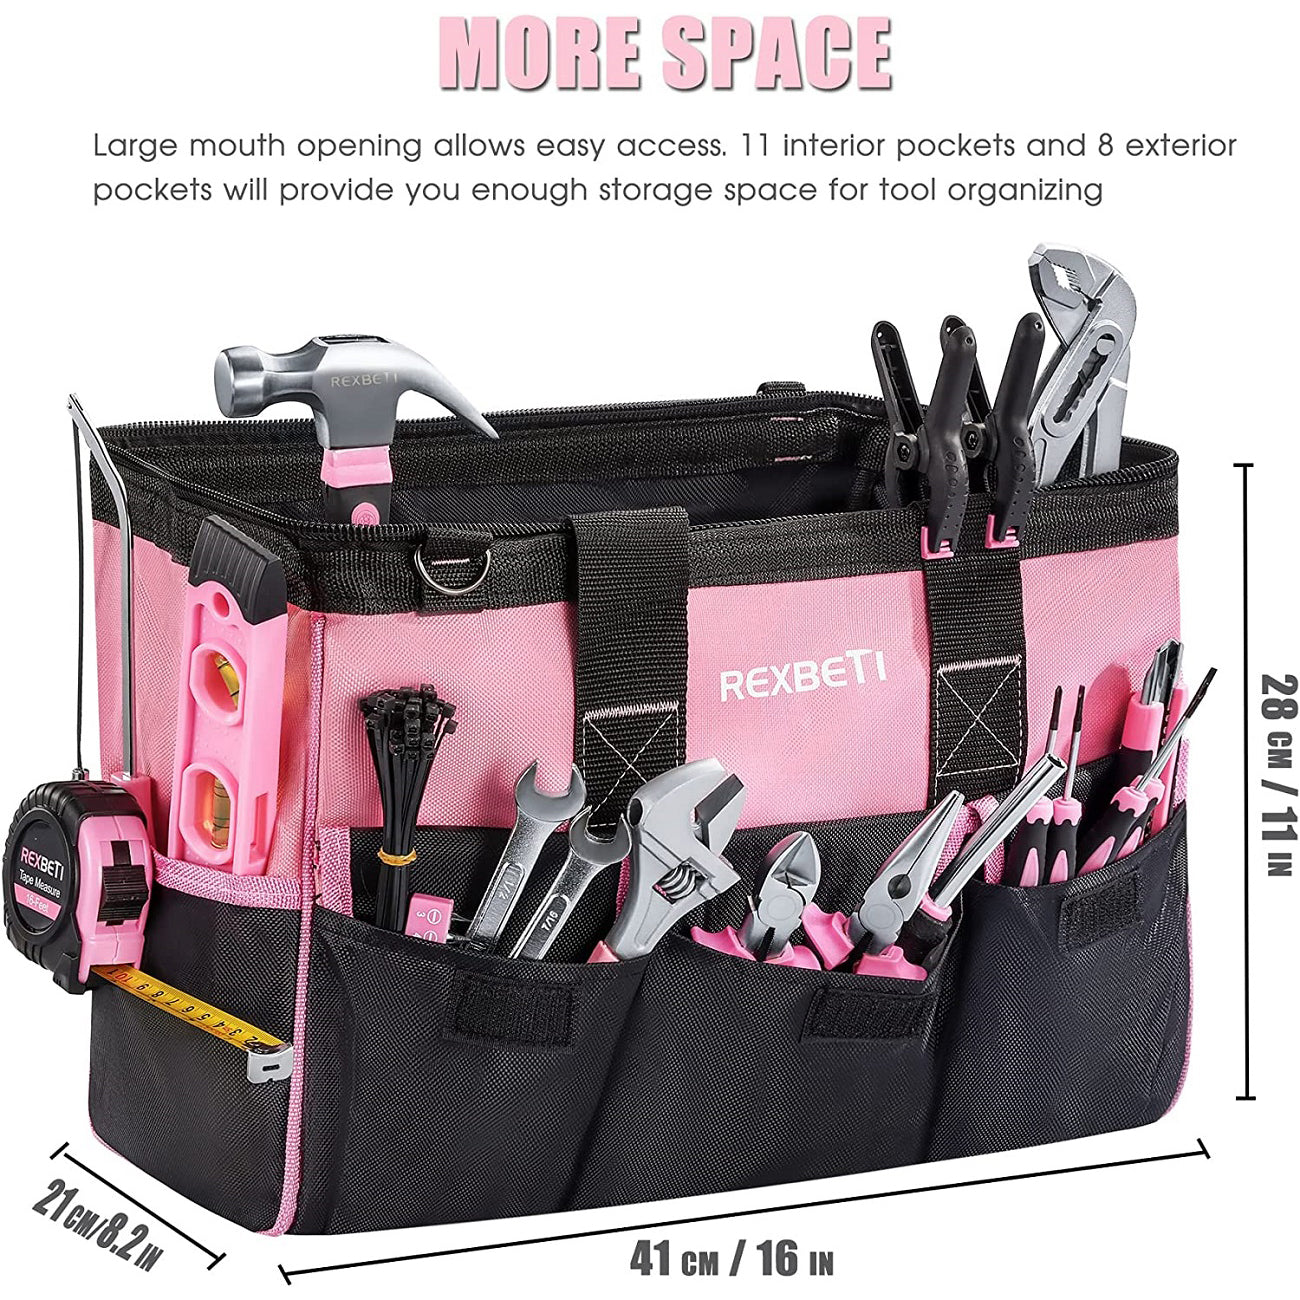 REXBETI 219-Piece Pink Tool Set, Ladies Hand Tool Set with 16 inch Too